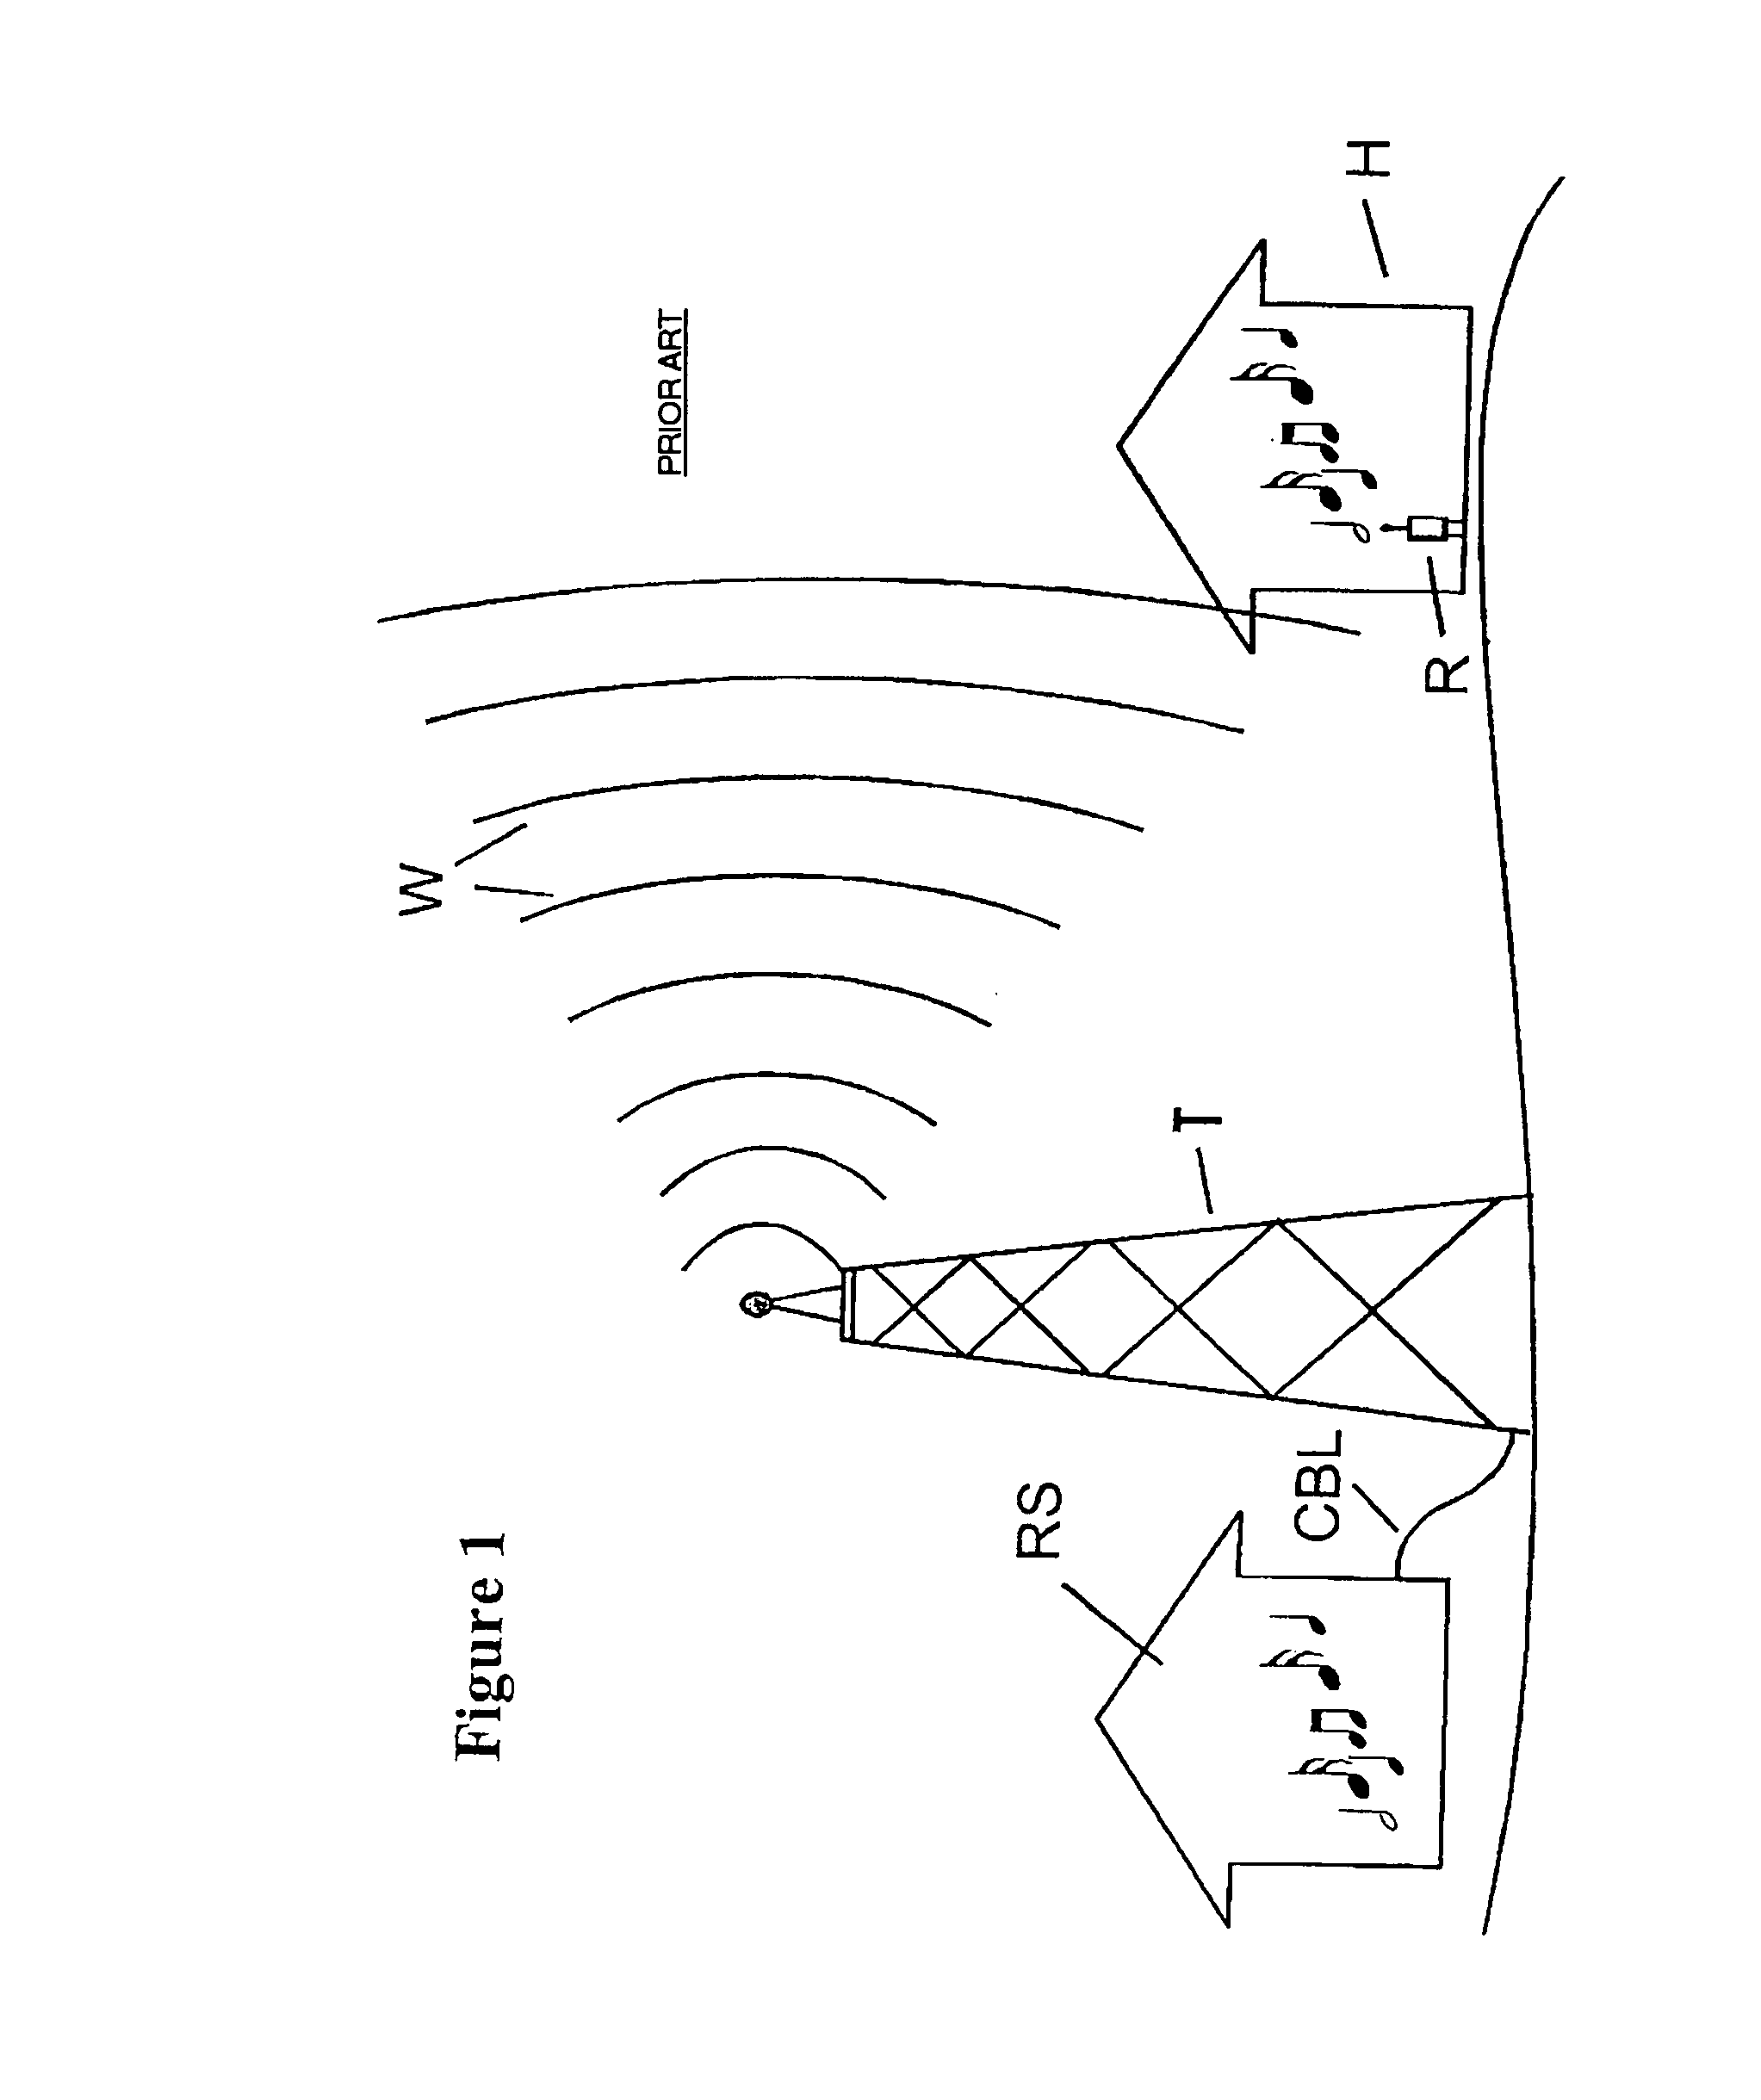 Electromagnetic field communications system for wireless networks